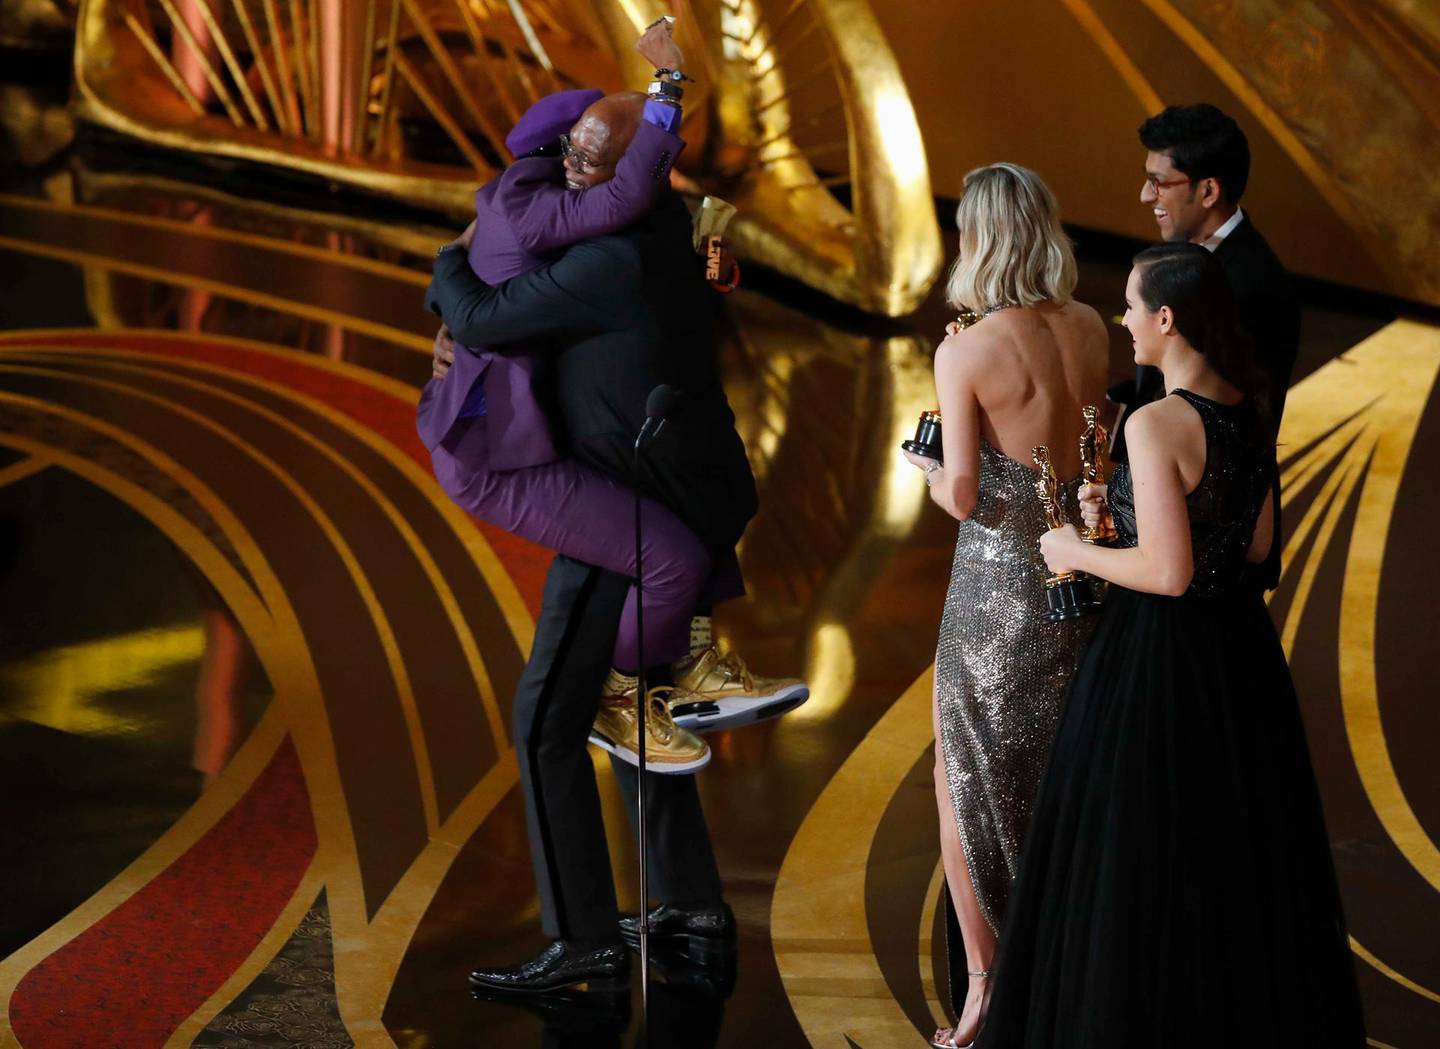 91st Academy Awards - Oscars Show - Hollywood, Los Angeles, California, U.S., February 24, 2019. Spike Lee celebrates onstage with Samuel L. Jackson as he receives the Best Adapted Screenplay award for “BlacKkKlansman”. REUTERS/Mike Blake